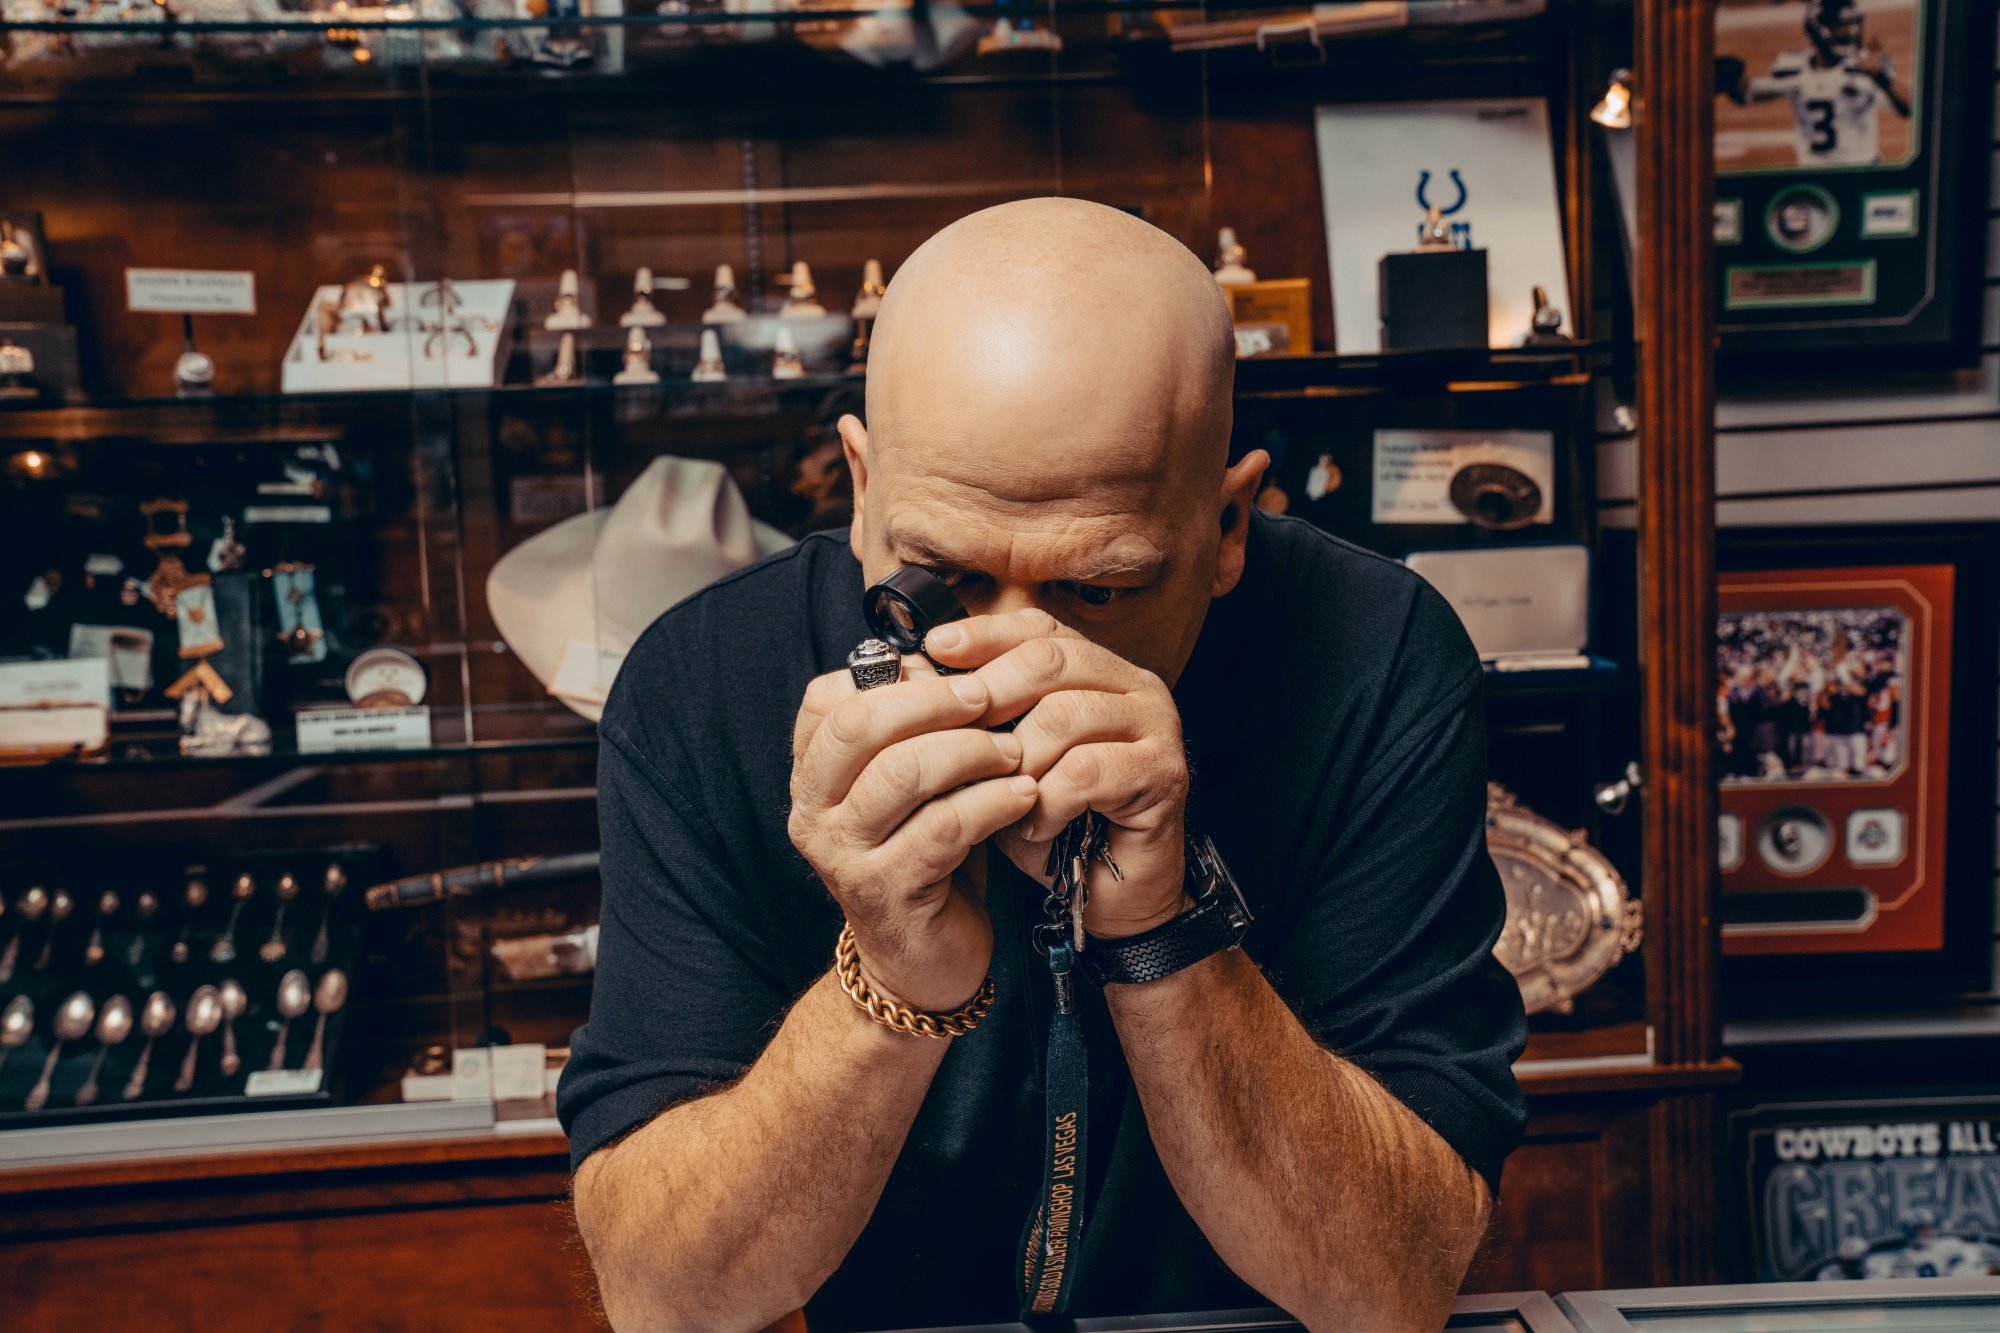 Pawn Stars: HOW IS THIS LEGAL?! Top 5 *Almost* Illegal Items 